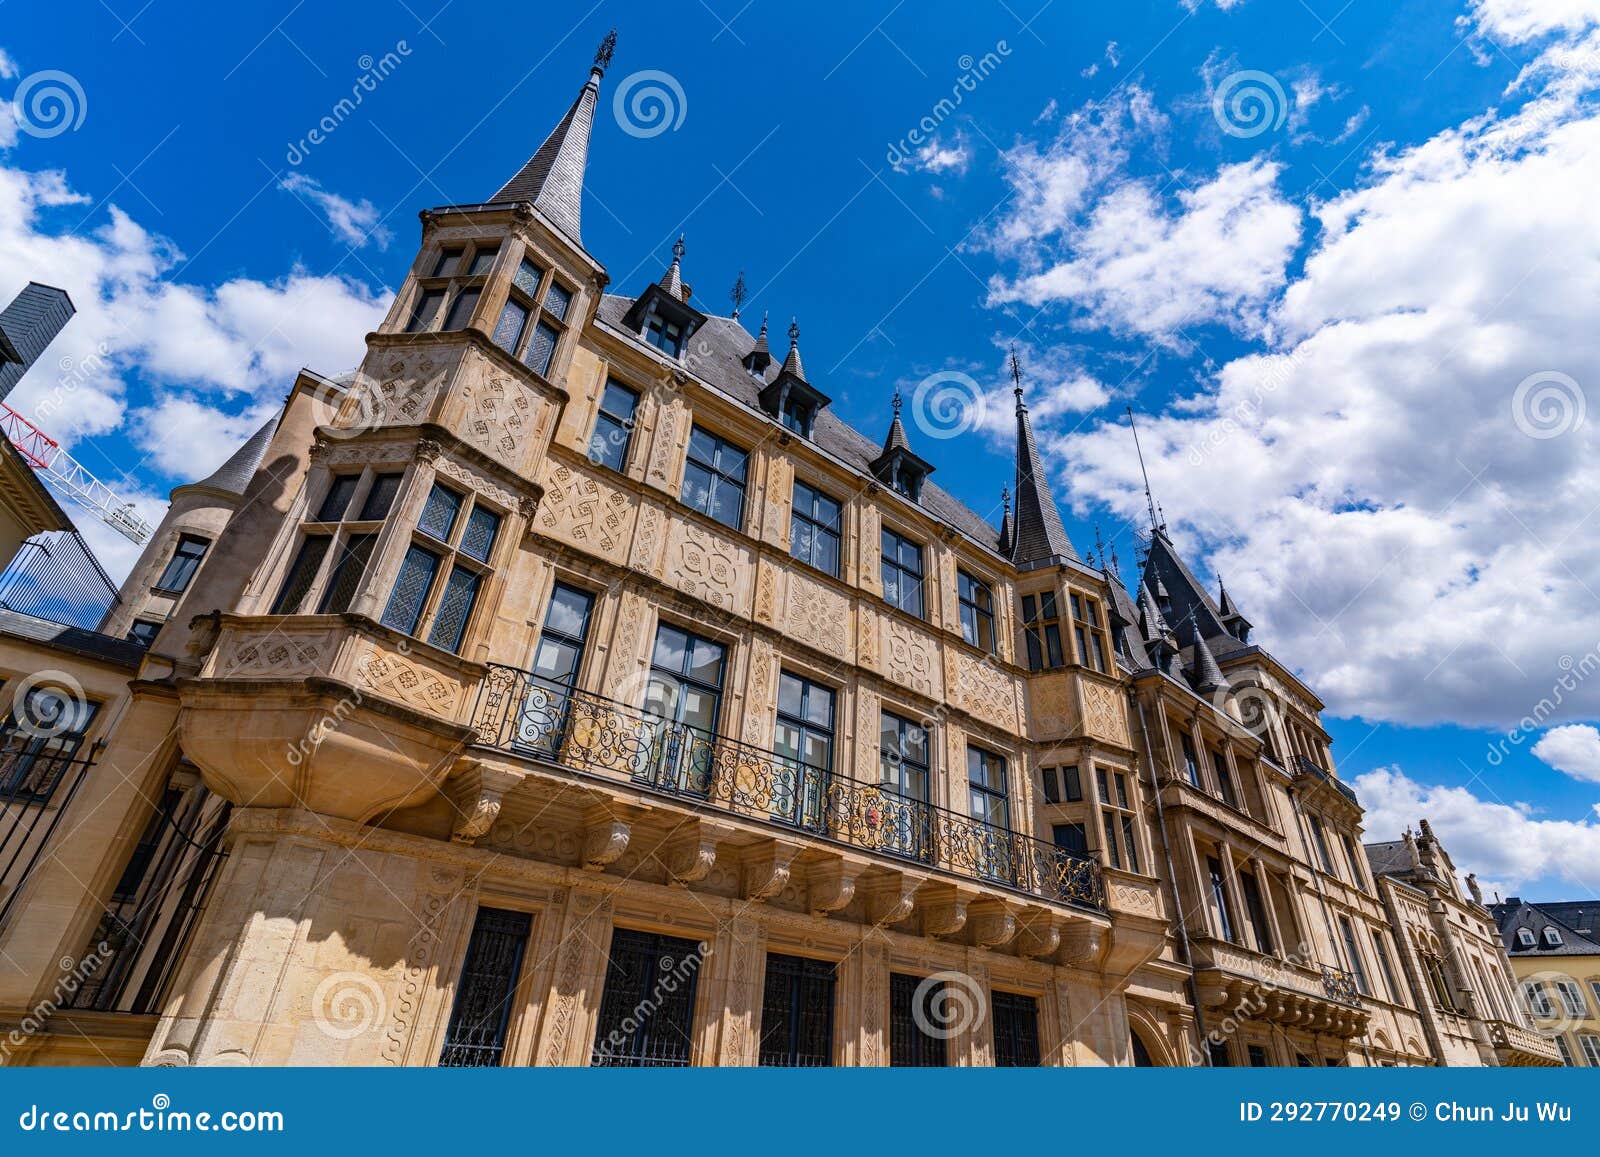 Grand Ducal Palace, a Palace in Luxembourg Stock Image - Image of ...